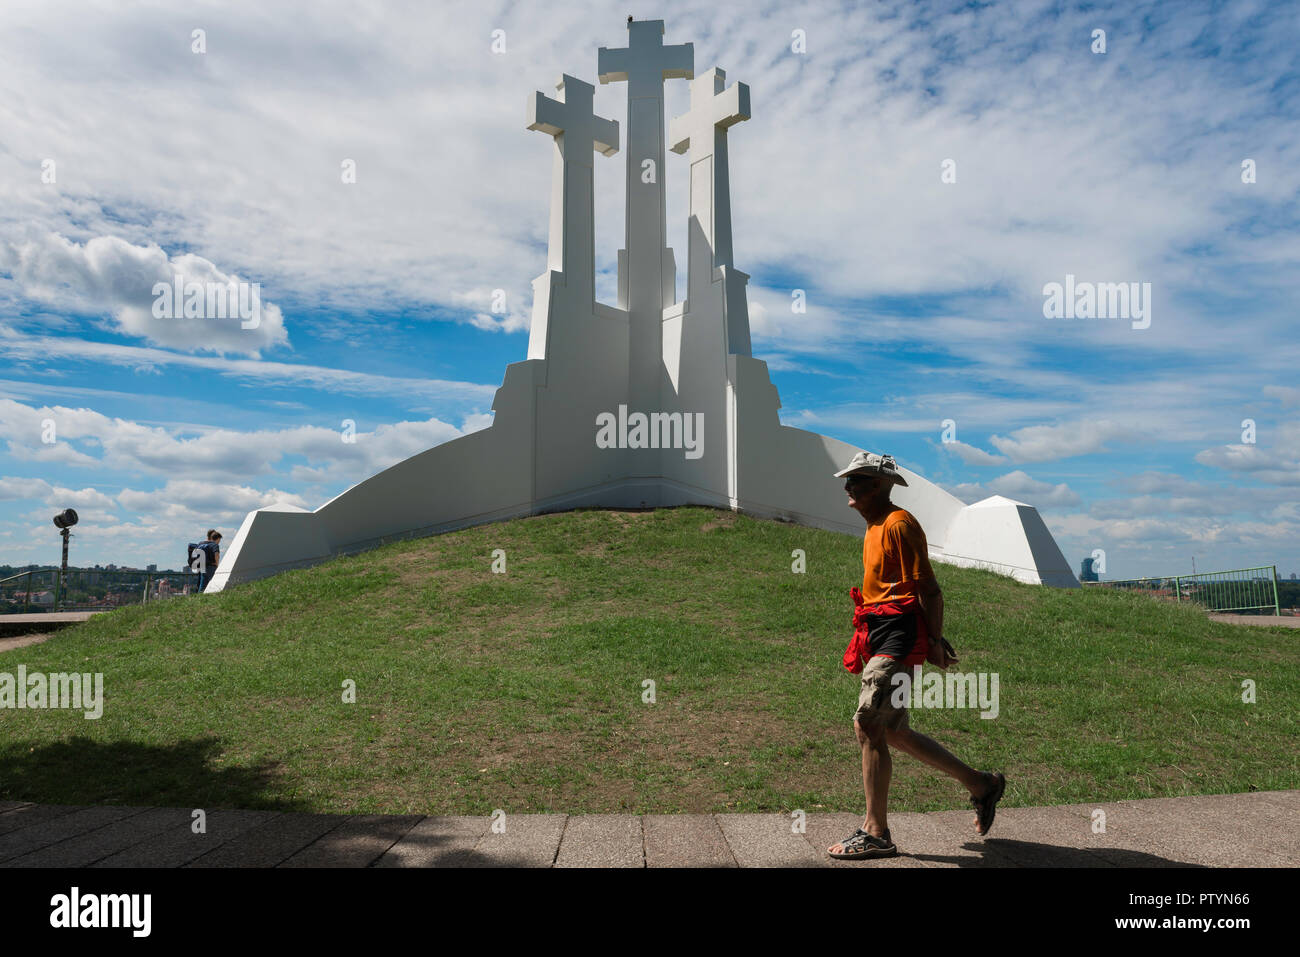 Three Crosses Hill, a tourist in Vilnius walks past three huge white crosses sited on a hill overlooking the city, Lithuania. Stock Photo